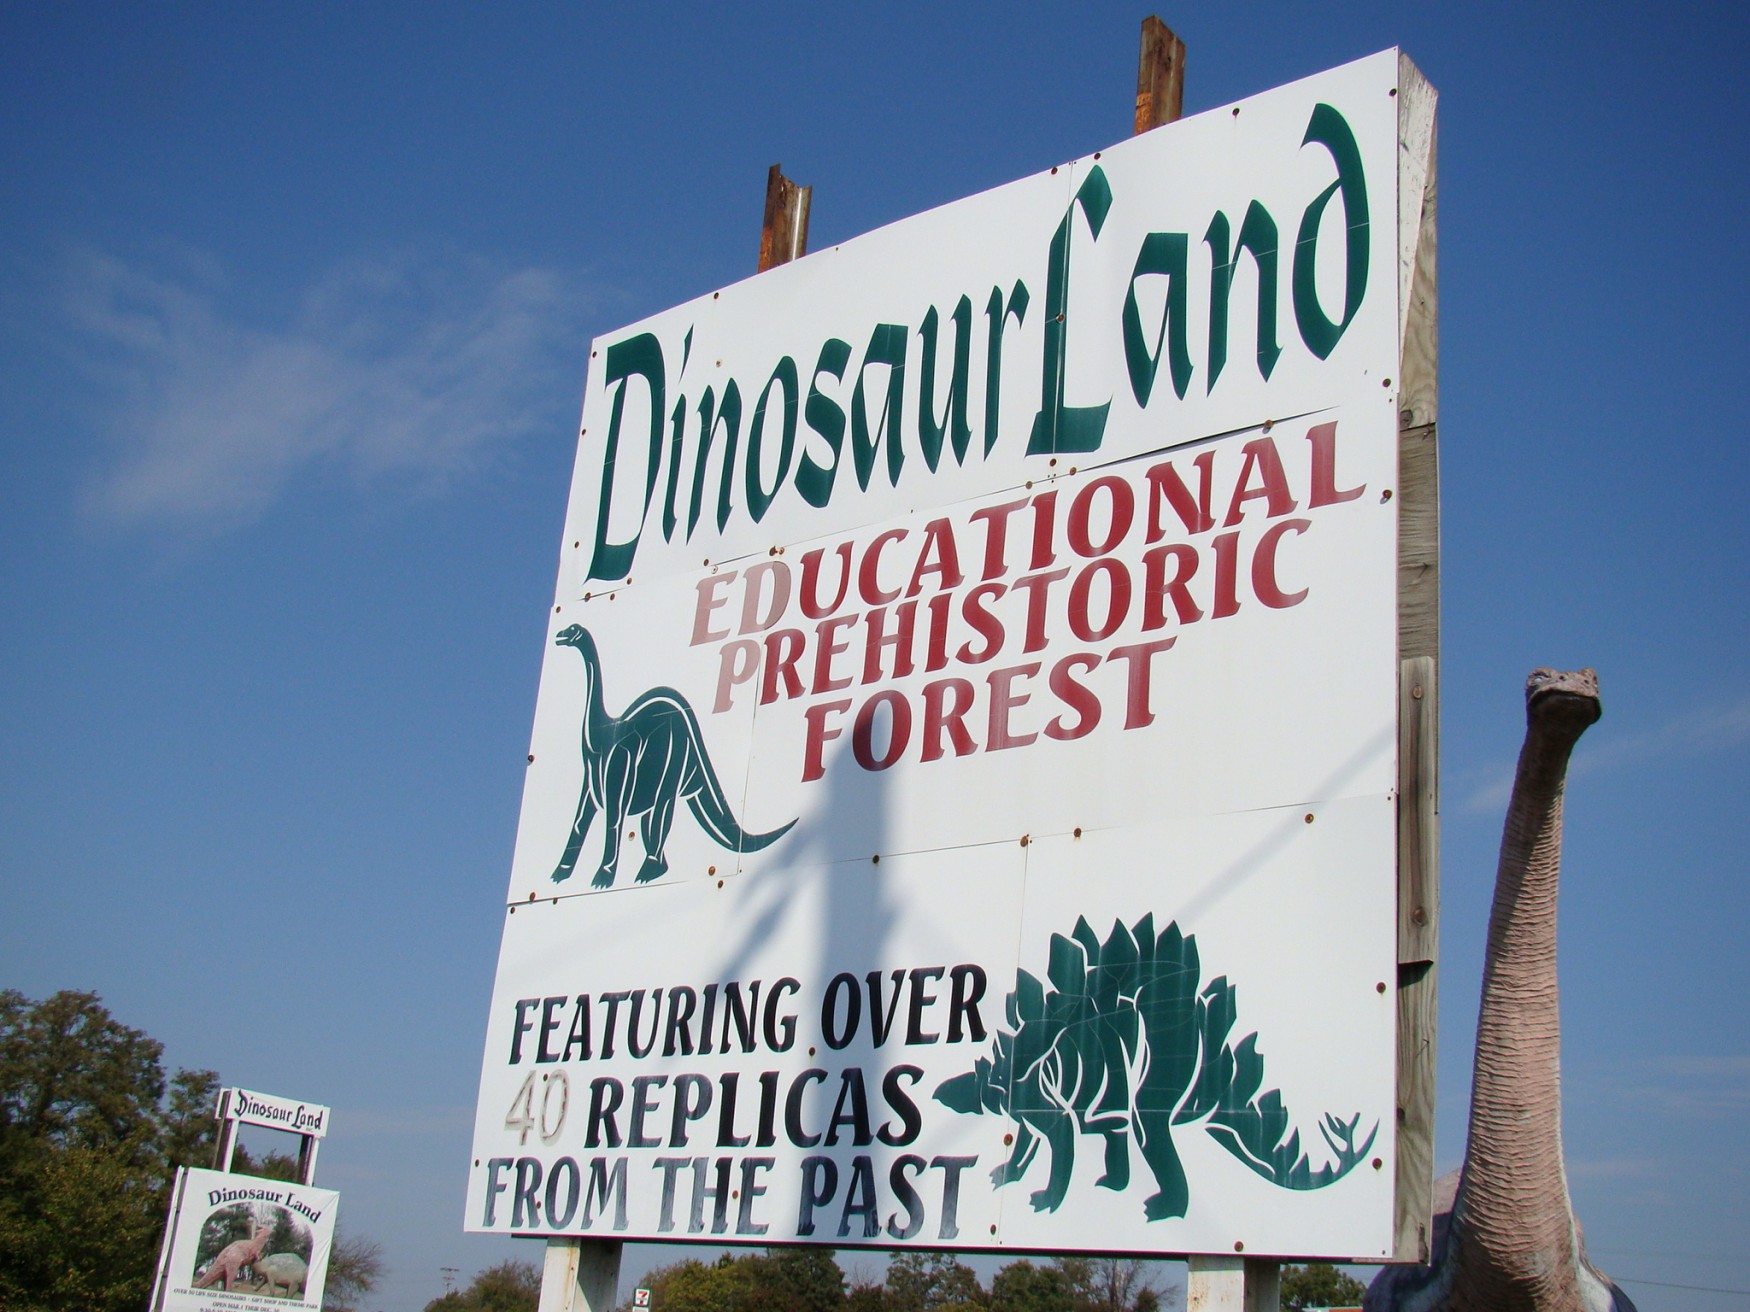 A Trip Back in Time: Dinosaur Land